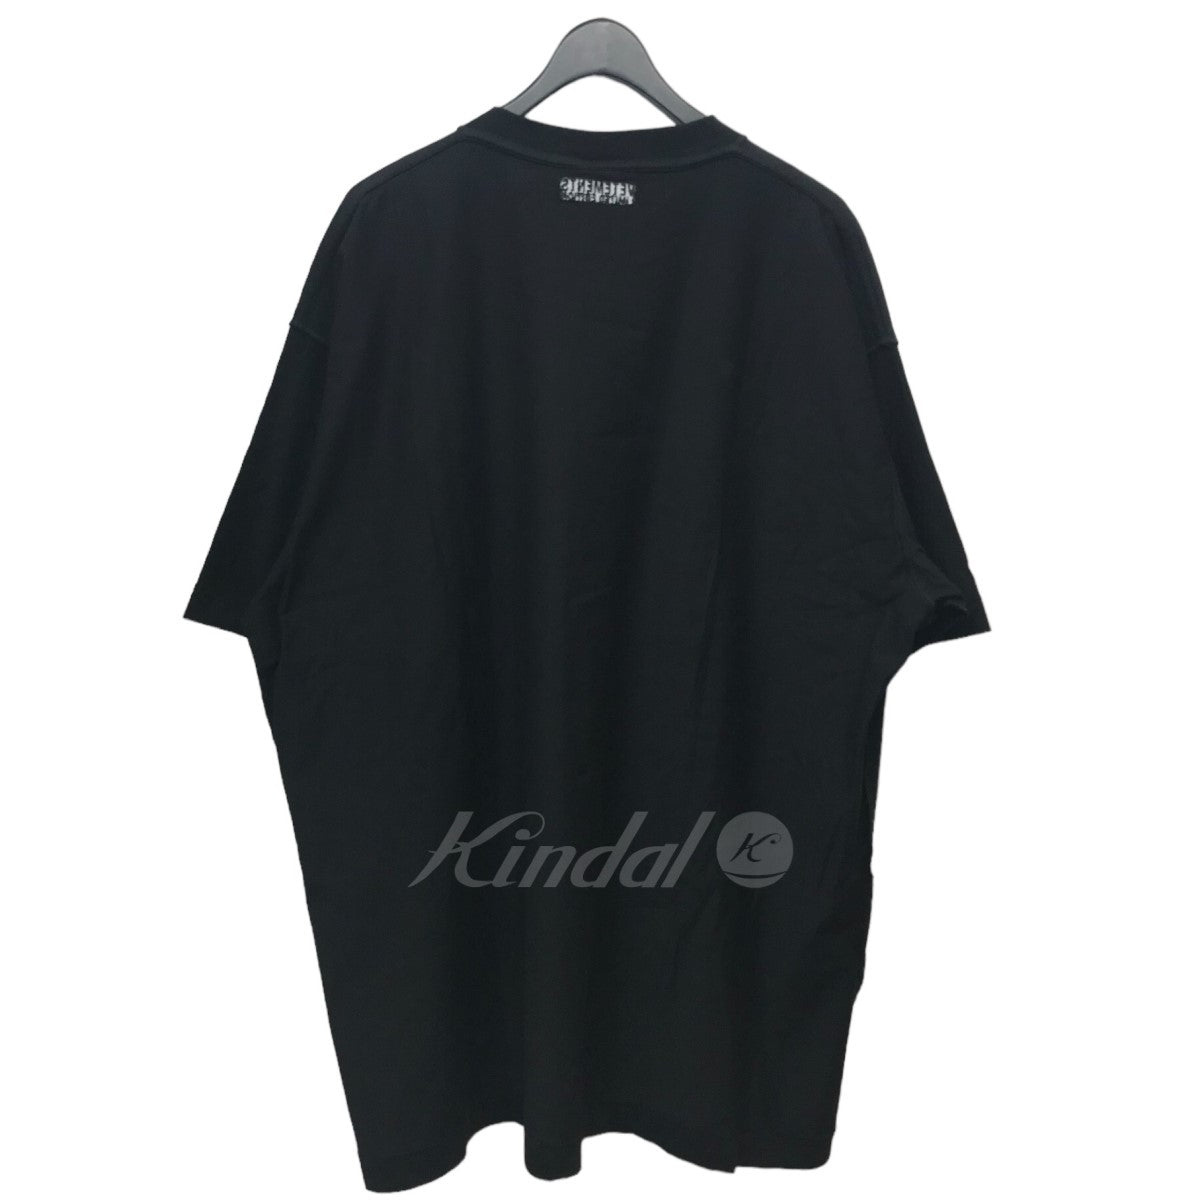 VETEMENTS(ヴェトモン) 23AW「INSIDE-OUT LOGO T-SHIRT」インサイド ...